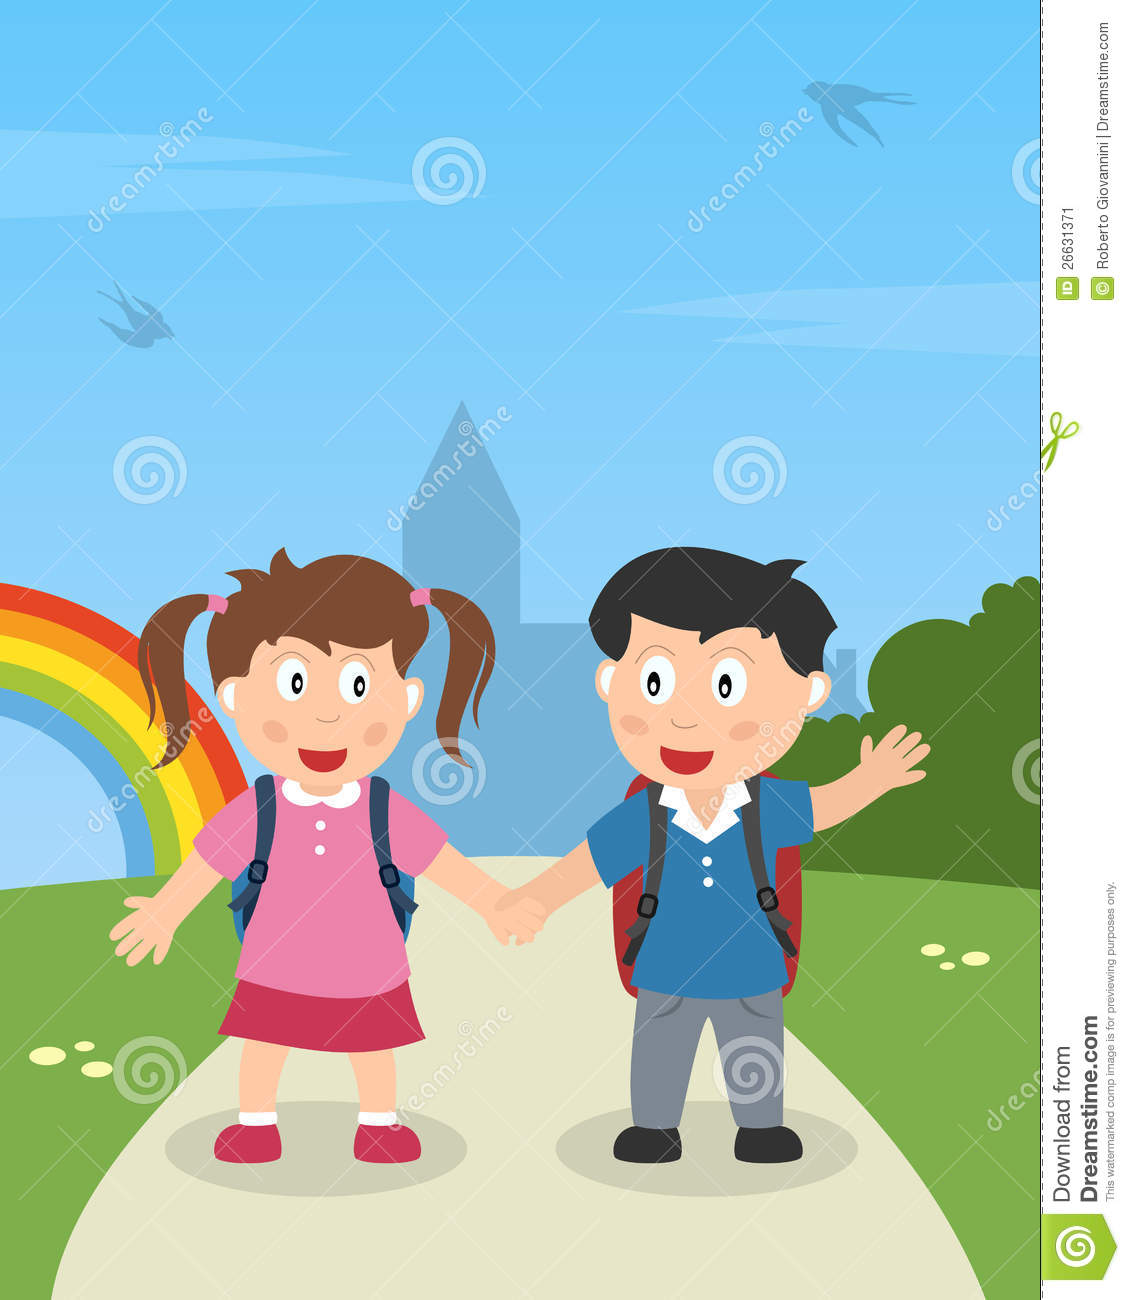 Two School Kids With Schoolbags Holding Hands And Walking In A Park    